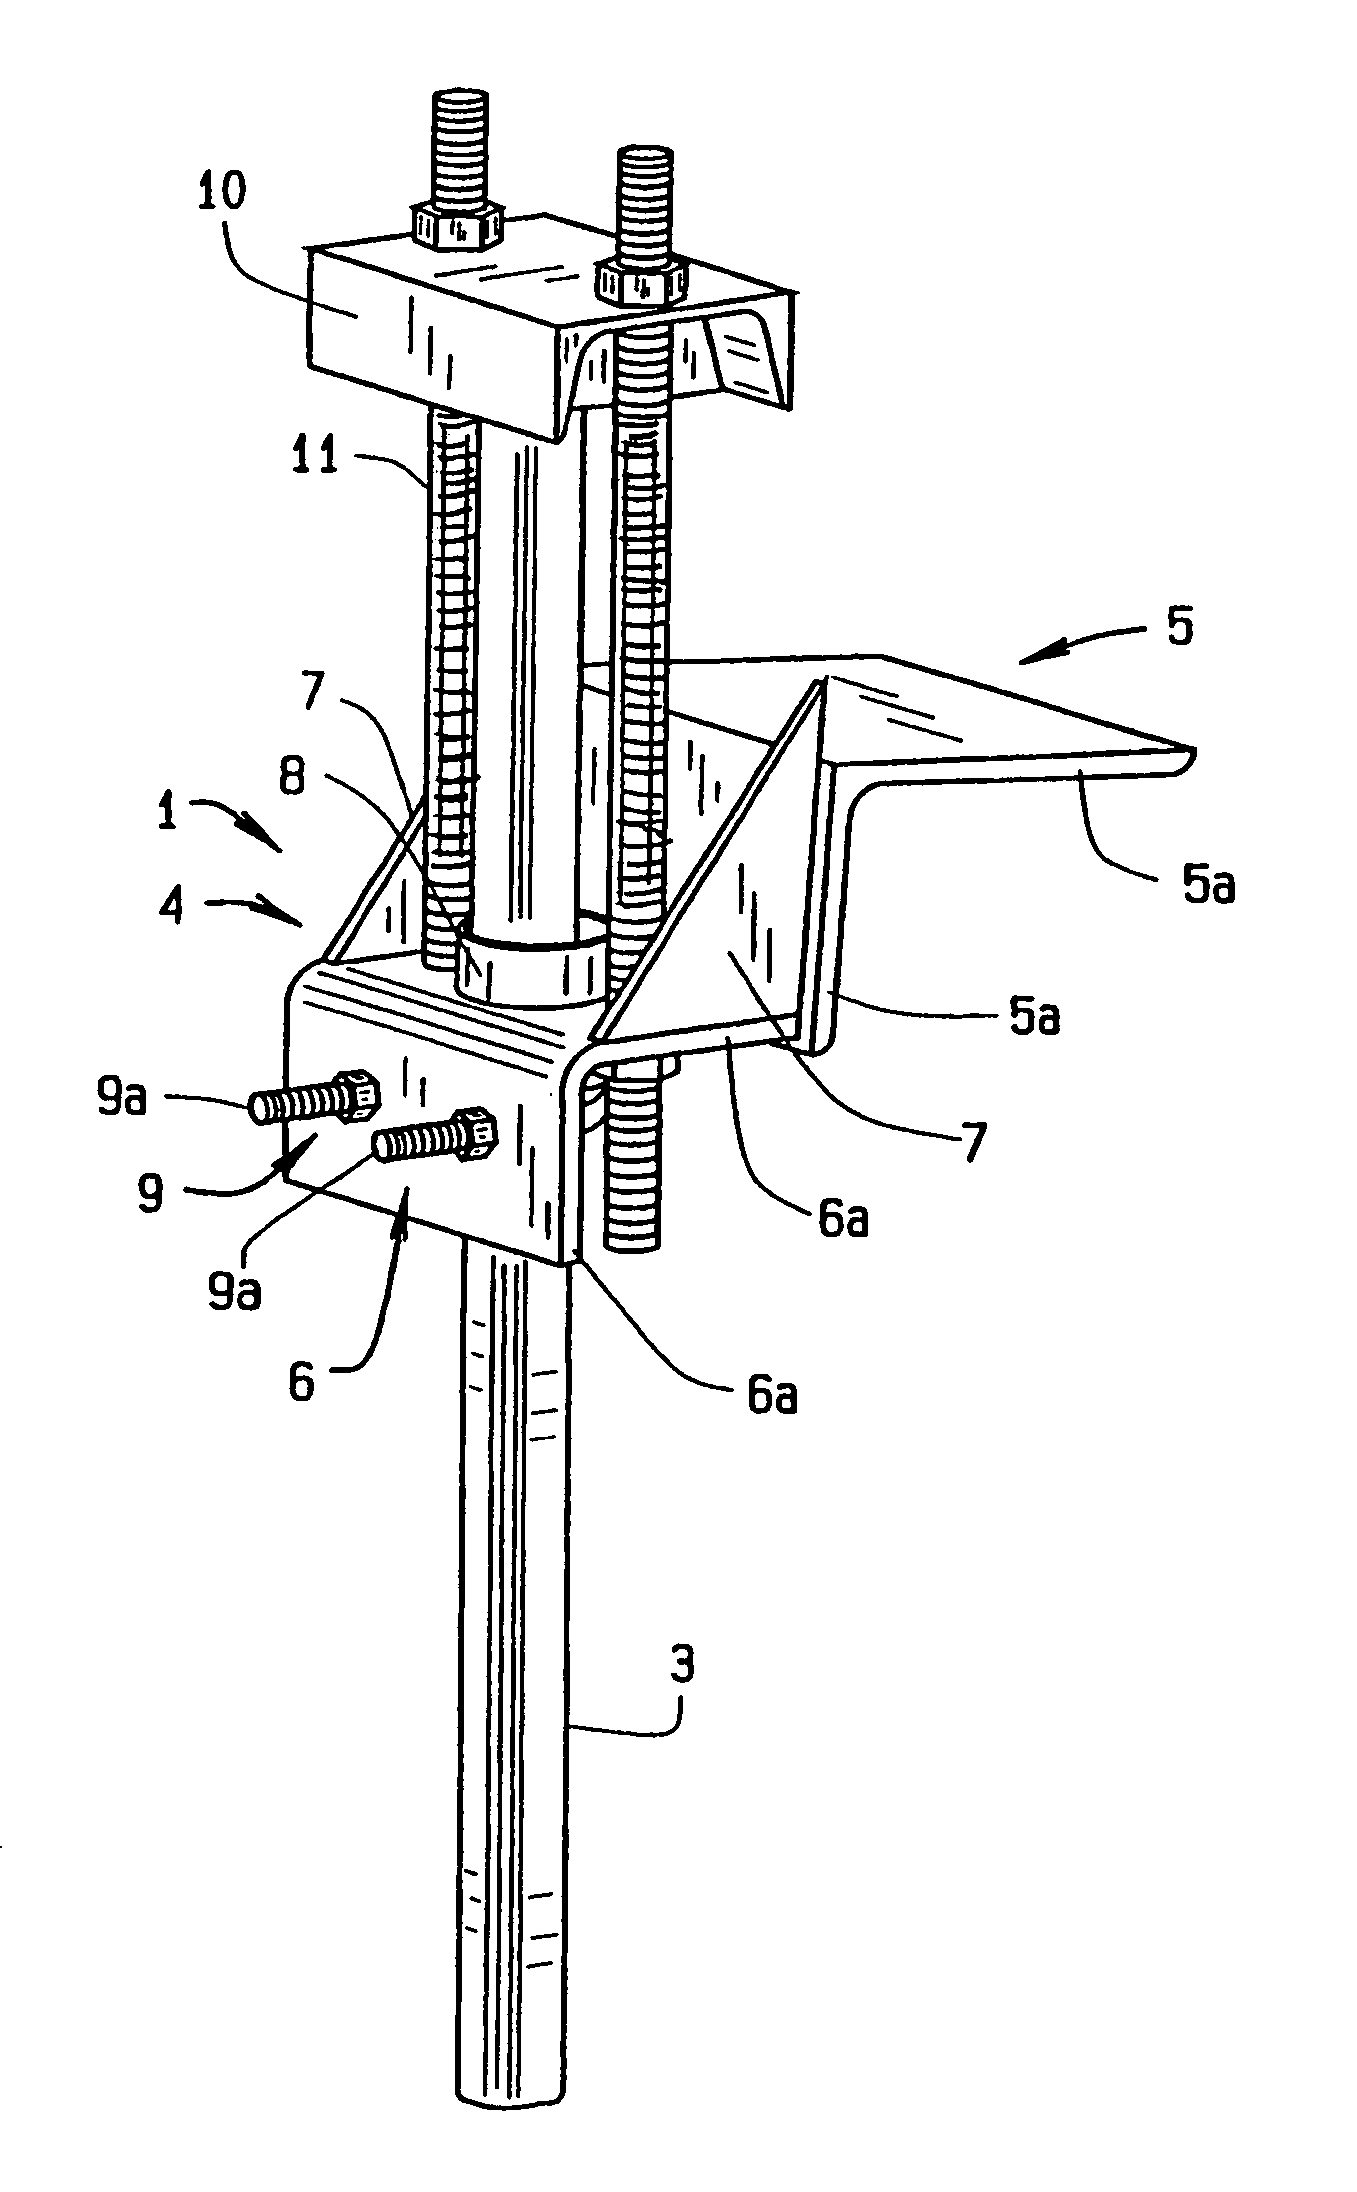 Bracket assembly for lifting and supporting a lightweight foundation